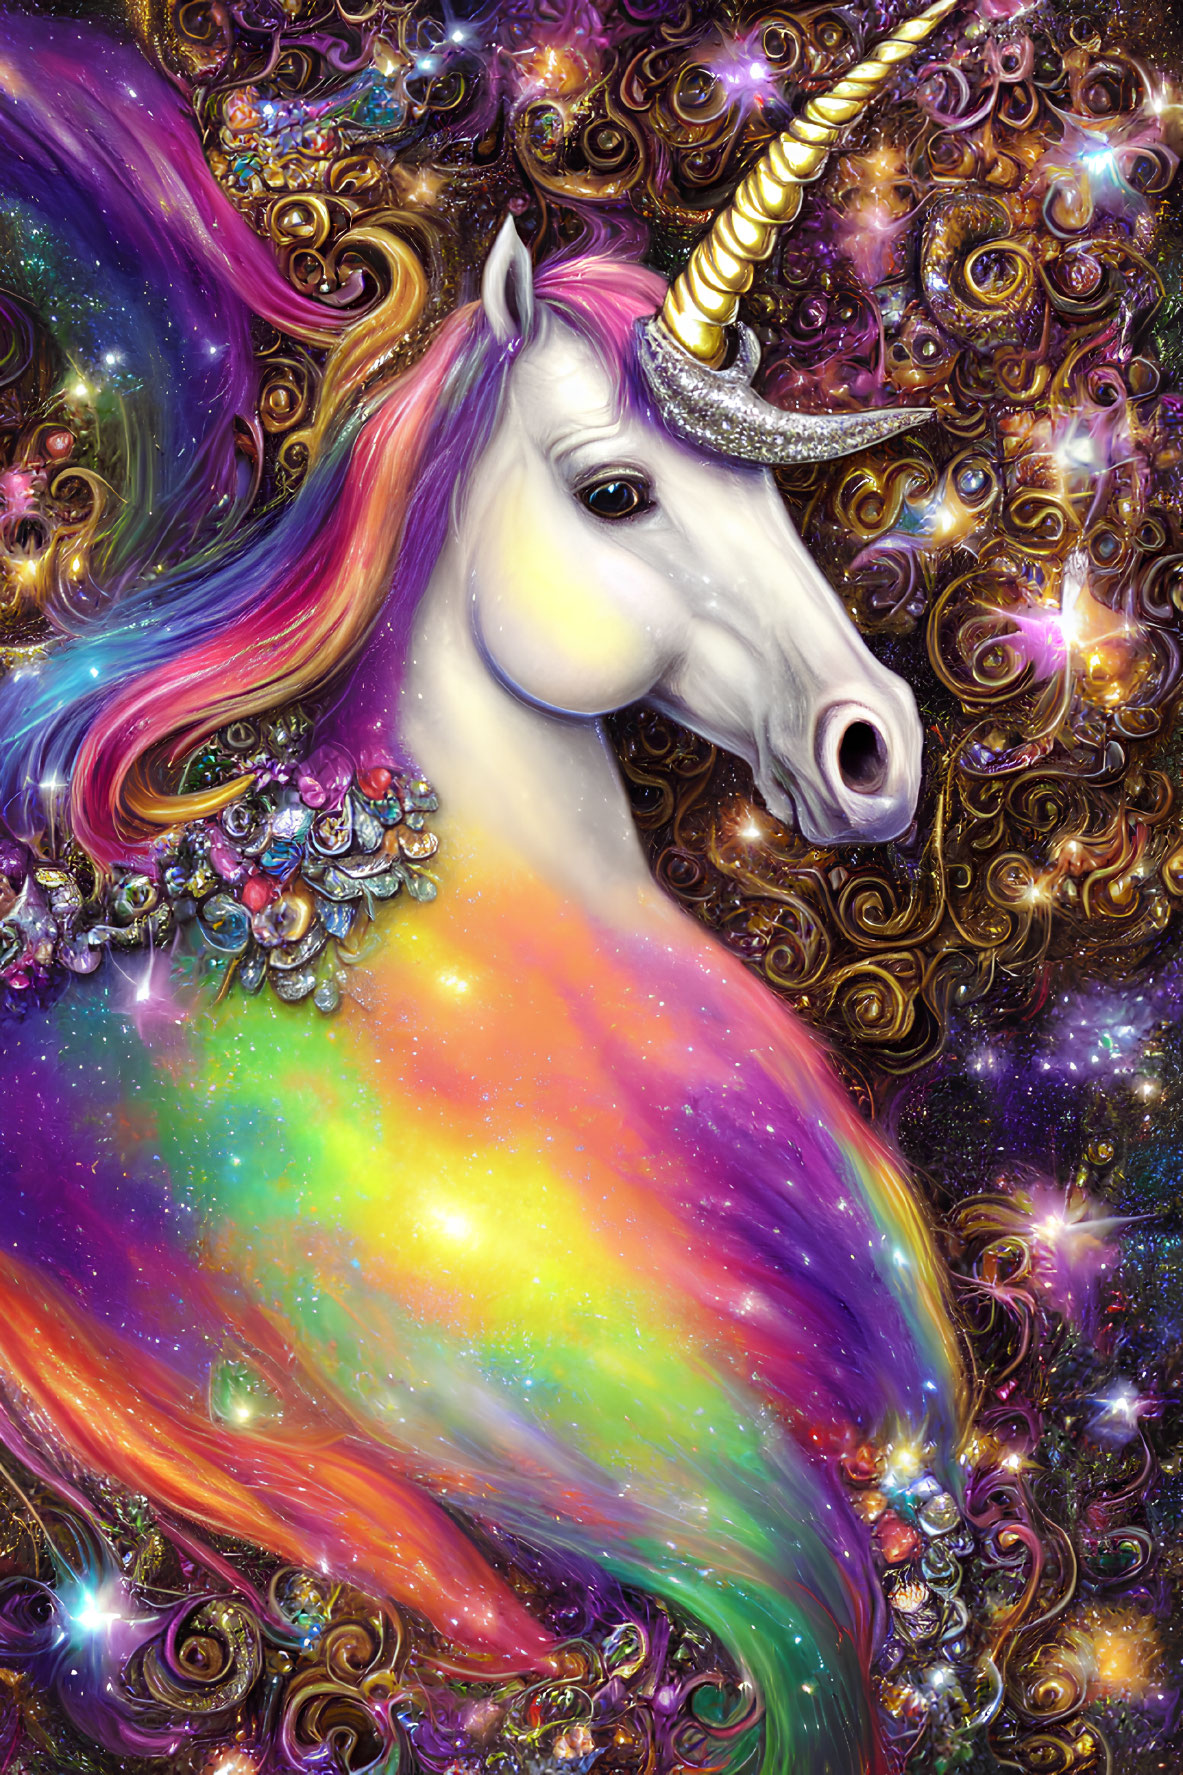 Colorful Unicorn with Rainbow Mane and Jewels on Cosmic Background